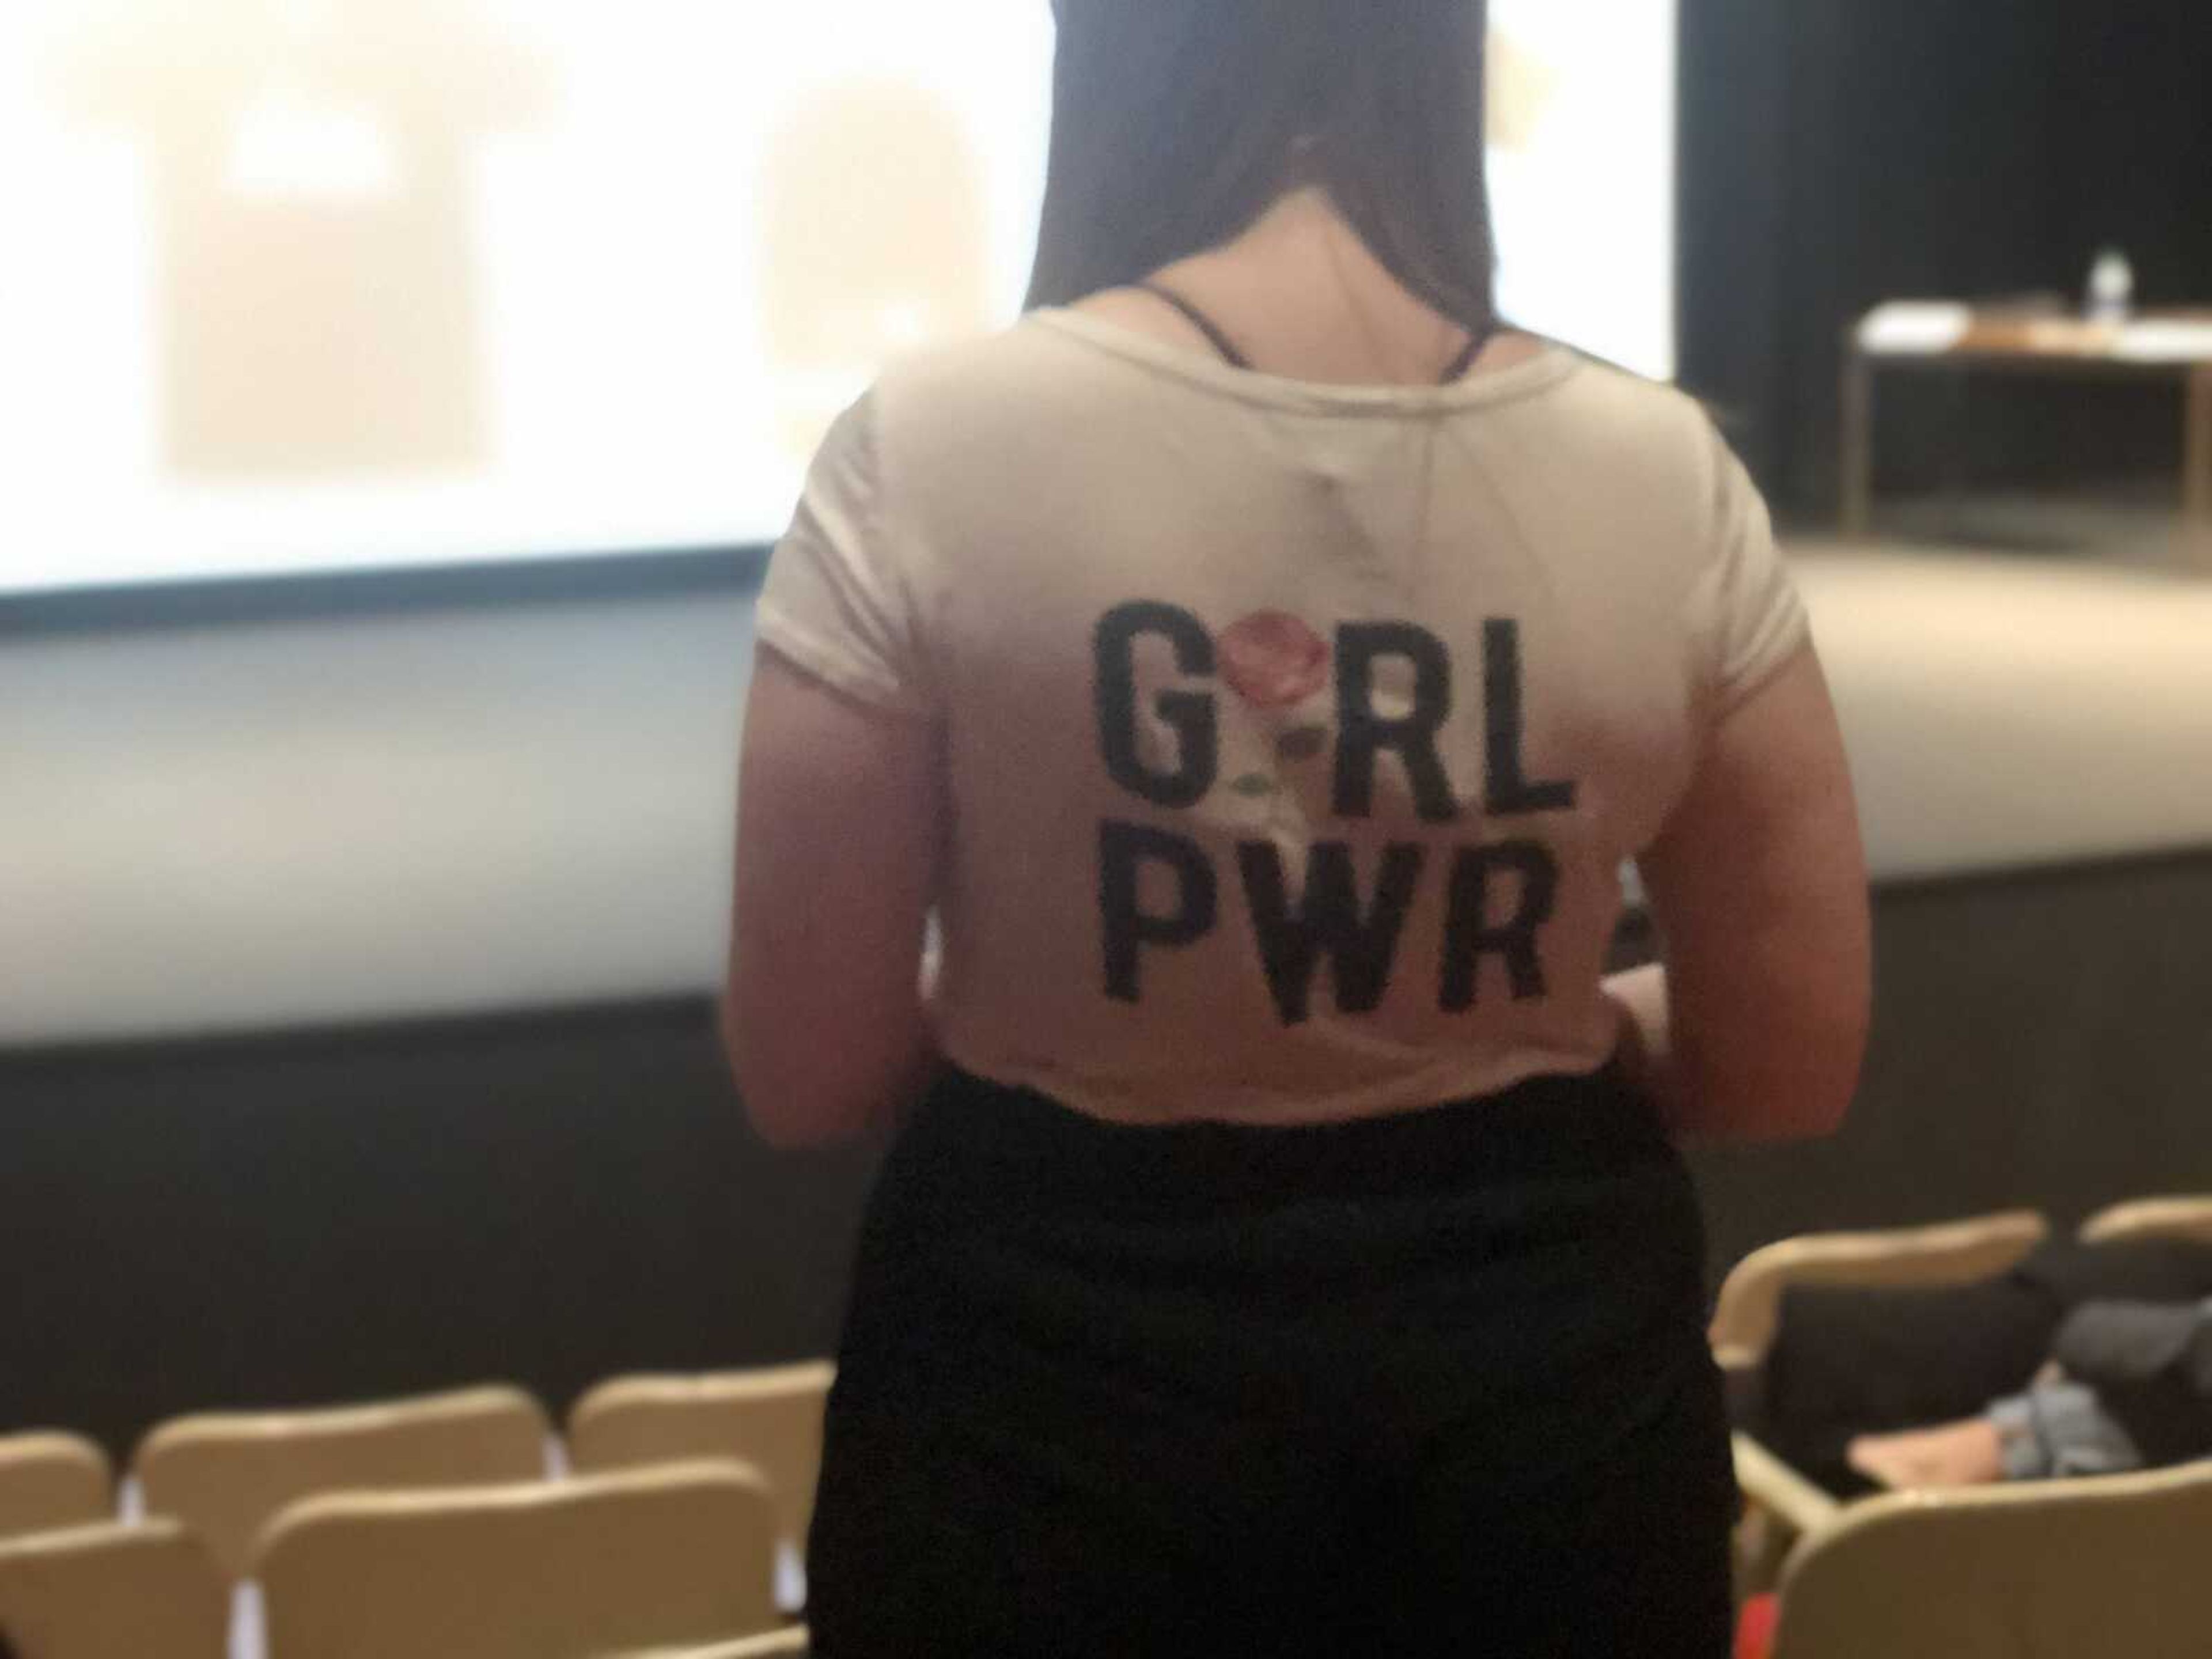 Freshman Taylor Meyers sported her "Girl PWR" shirt to the event at Rose Theatre on Feb. 5th.